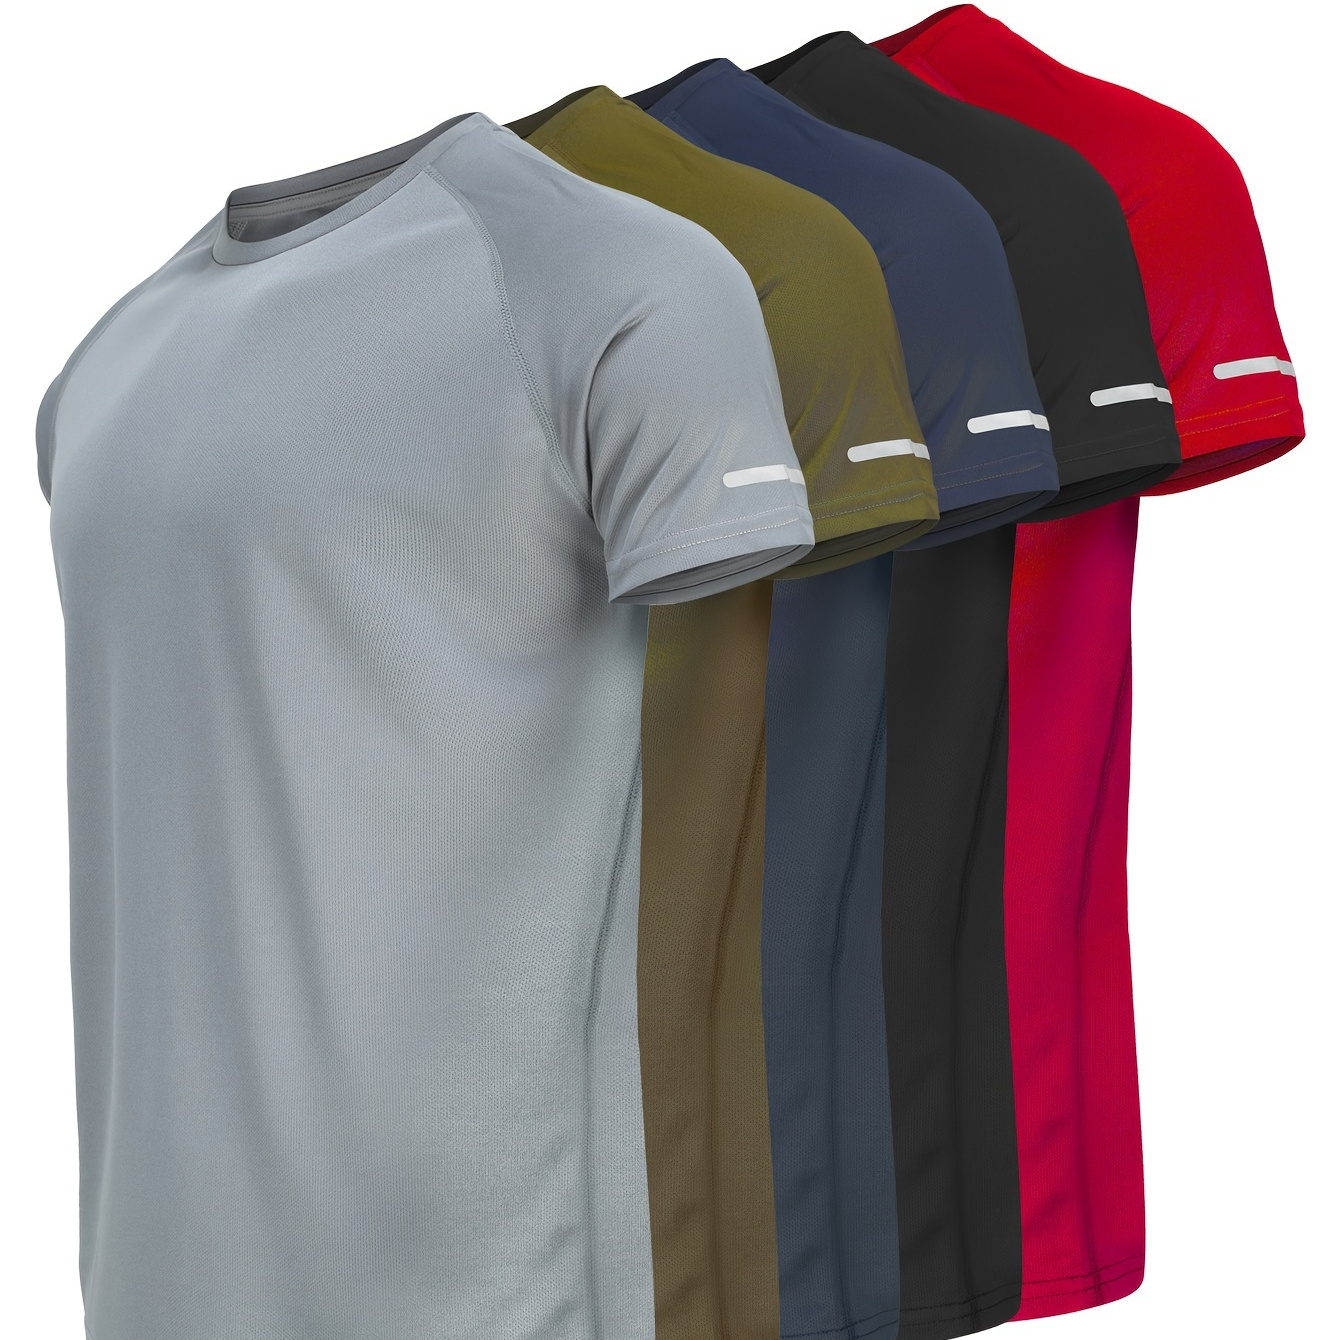 

T-shirt with reflective sports design, round neck and short sleeves, breathable and quick-drying, ideal for outdoor activities in summer.